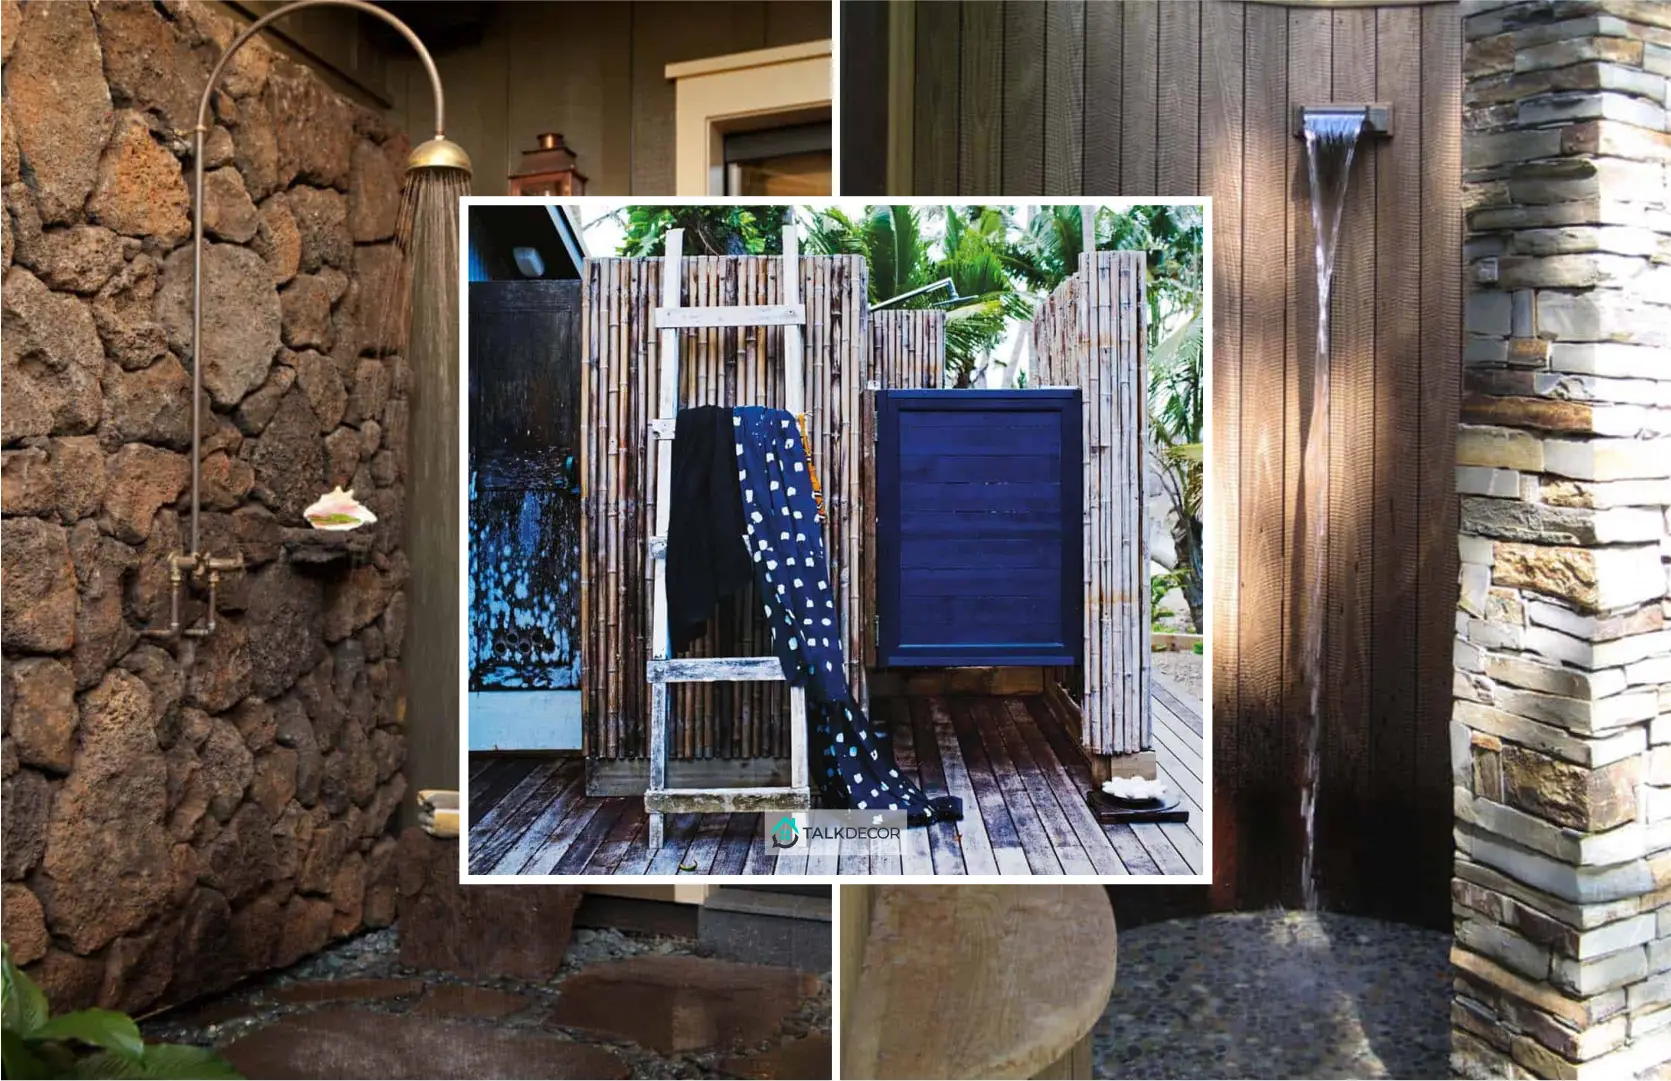 60 Outdoor Shower Design Ideas for Your After Summer Pool Time